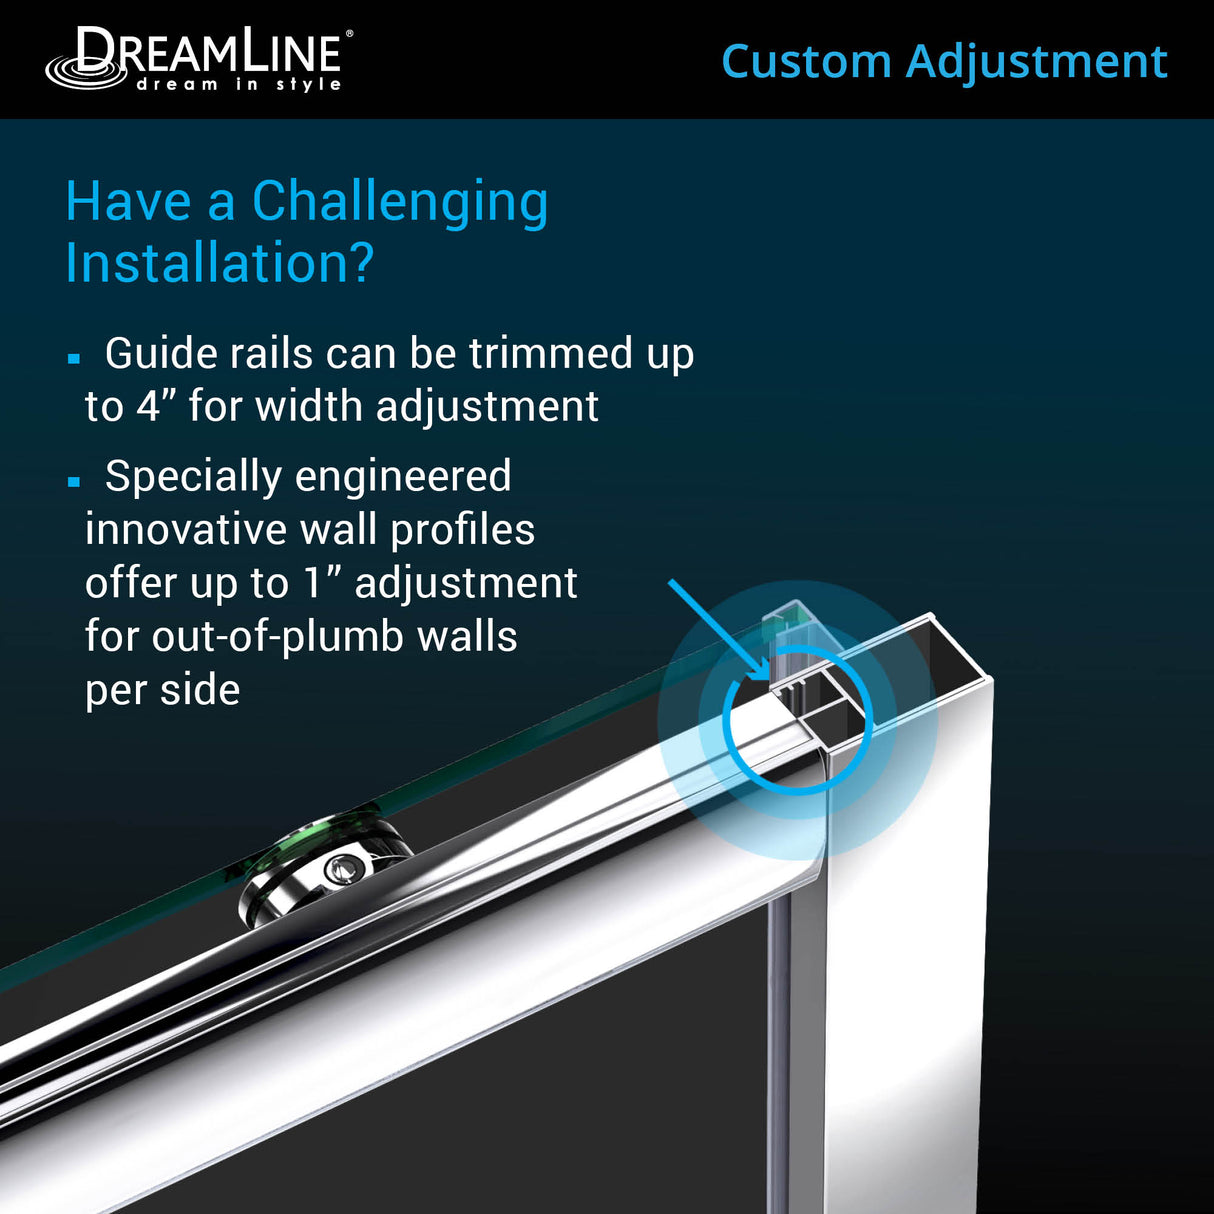 DreamLine Infinity-Z 32 in. D x 60 in. W x 76 3/4 in. H Clear Sliding Shower Door in Oil Rubbed Bronze, Right Drain and Wall Kit